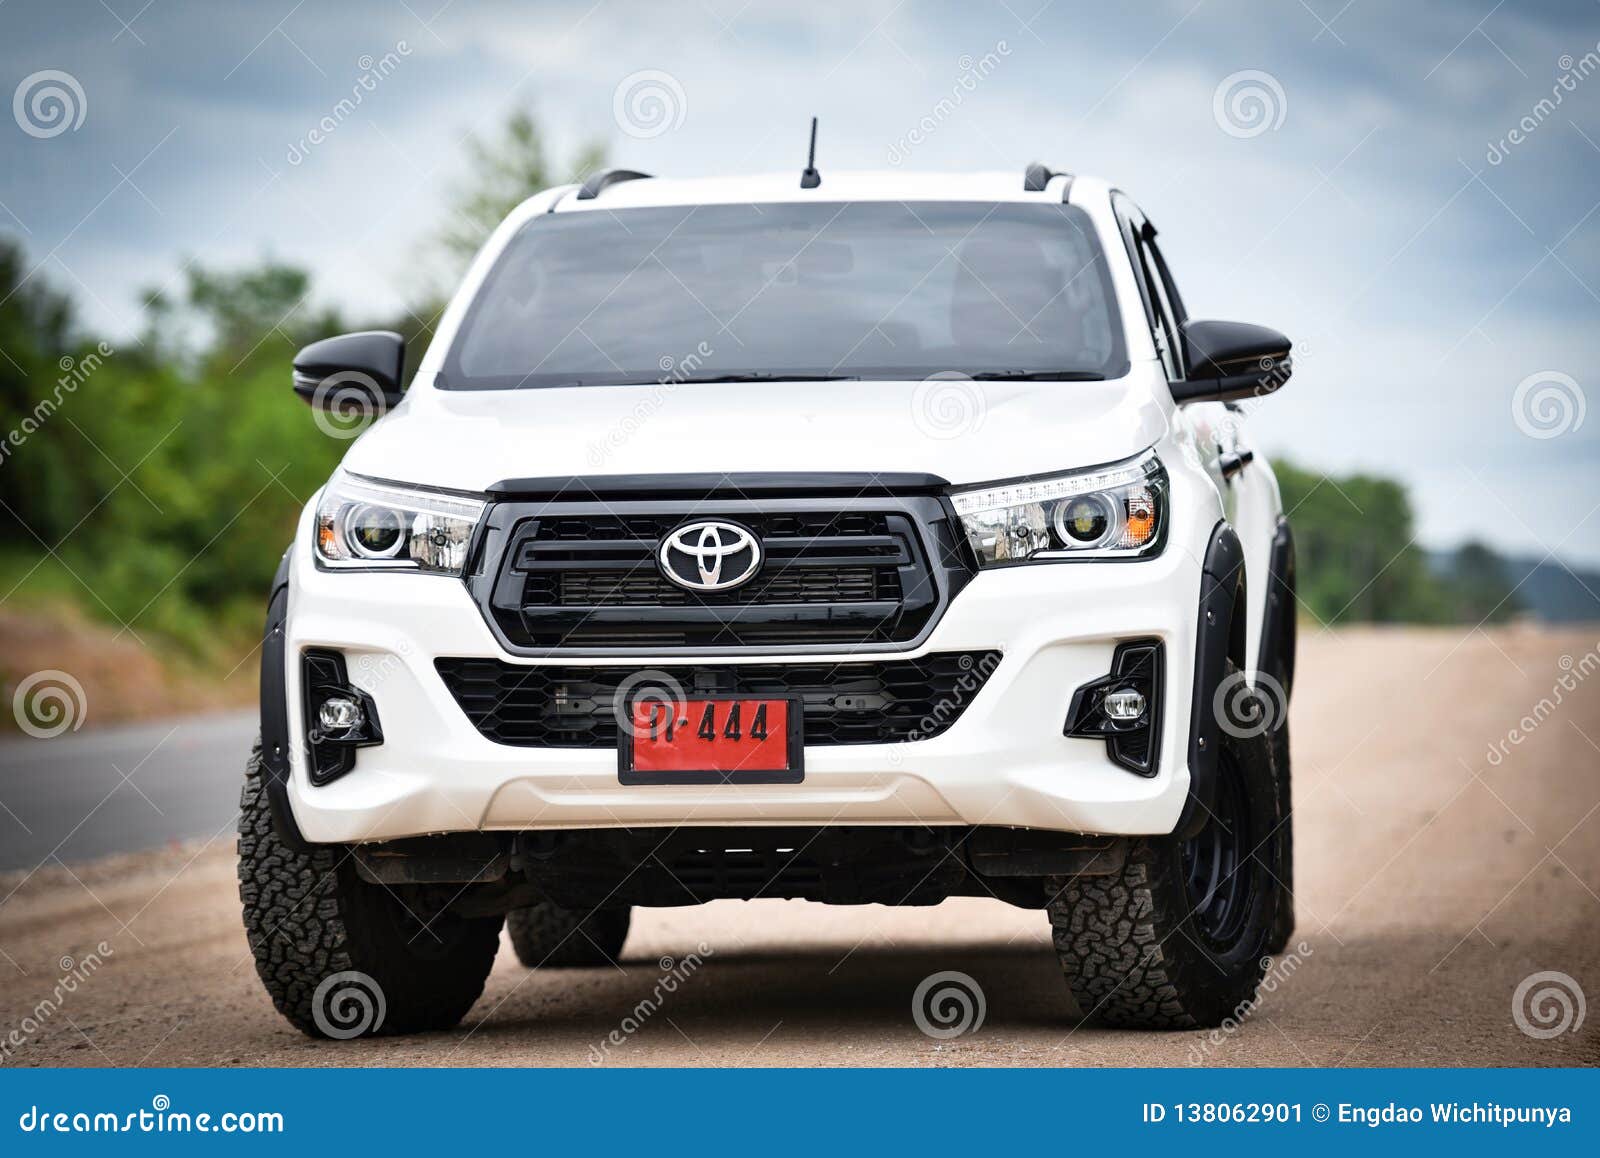 New Toyota Hilux Revo Rocco White Pickup Truck Offroad Car Double Cab 4X4  Editorial Photo - Image Of City, Manufacturer: 138062901